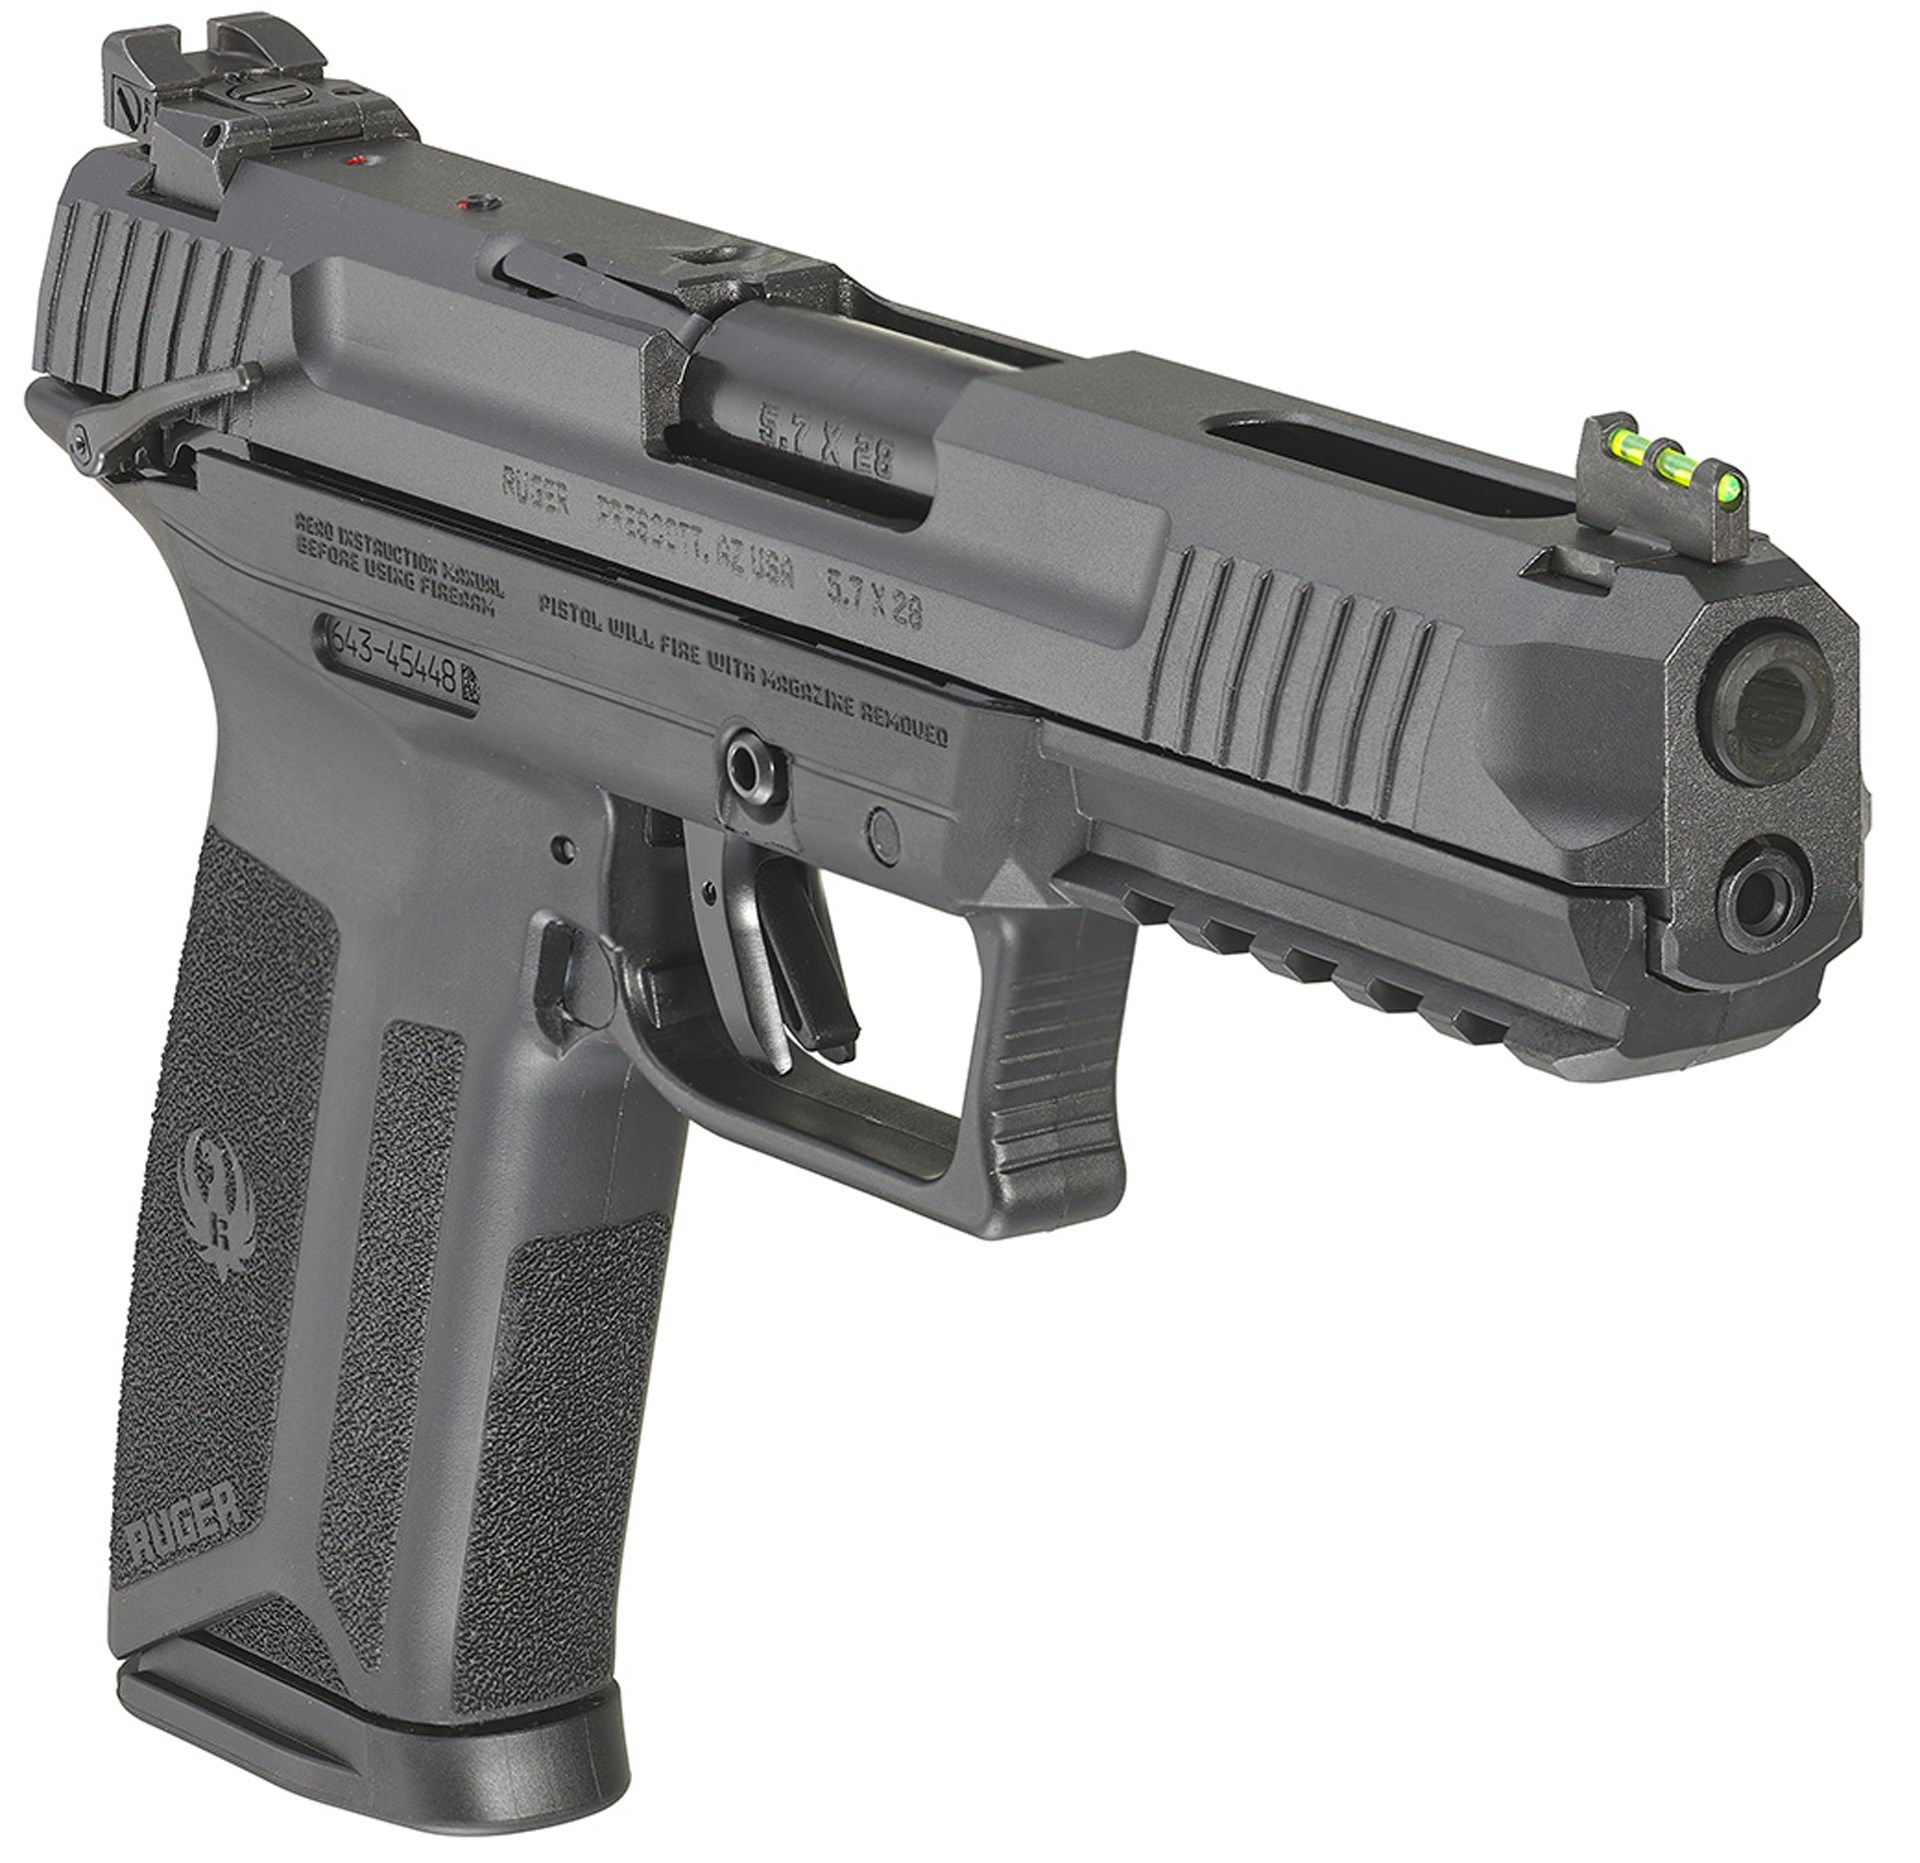 Ruger-5.7 pistol semi-automatic handgun dynamic quartering view right-side muzzle white background